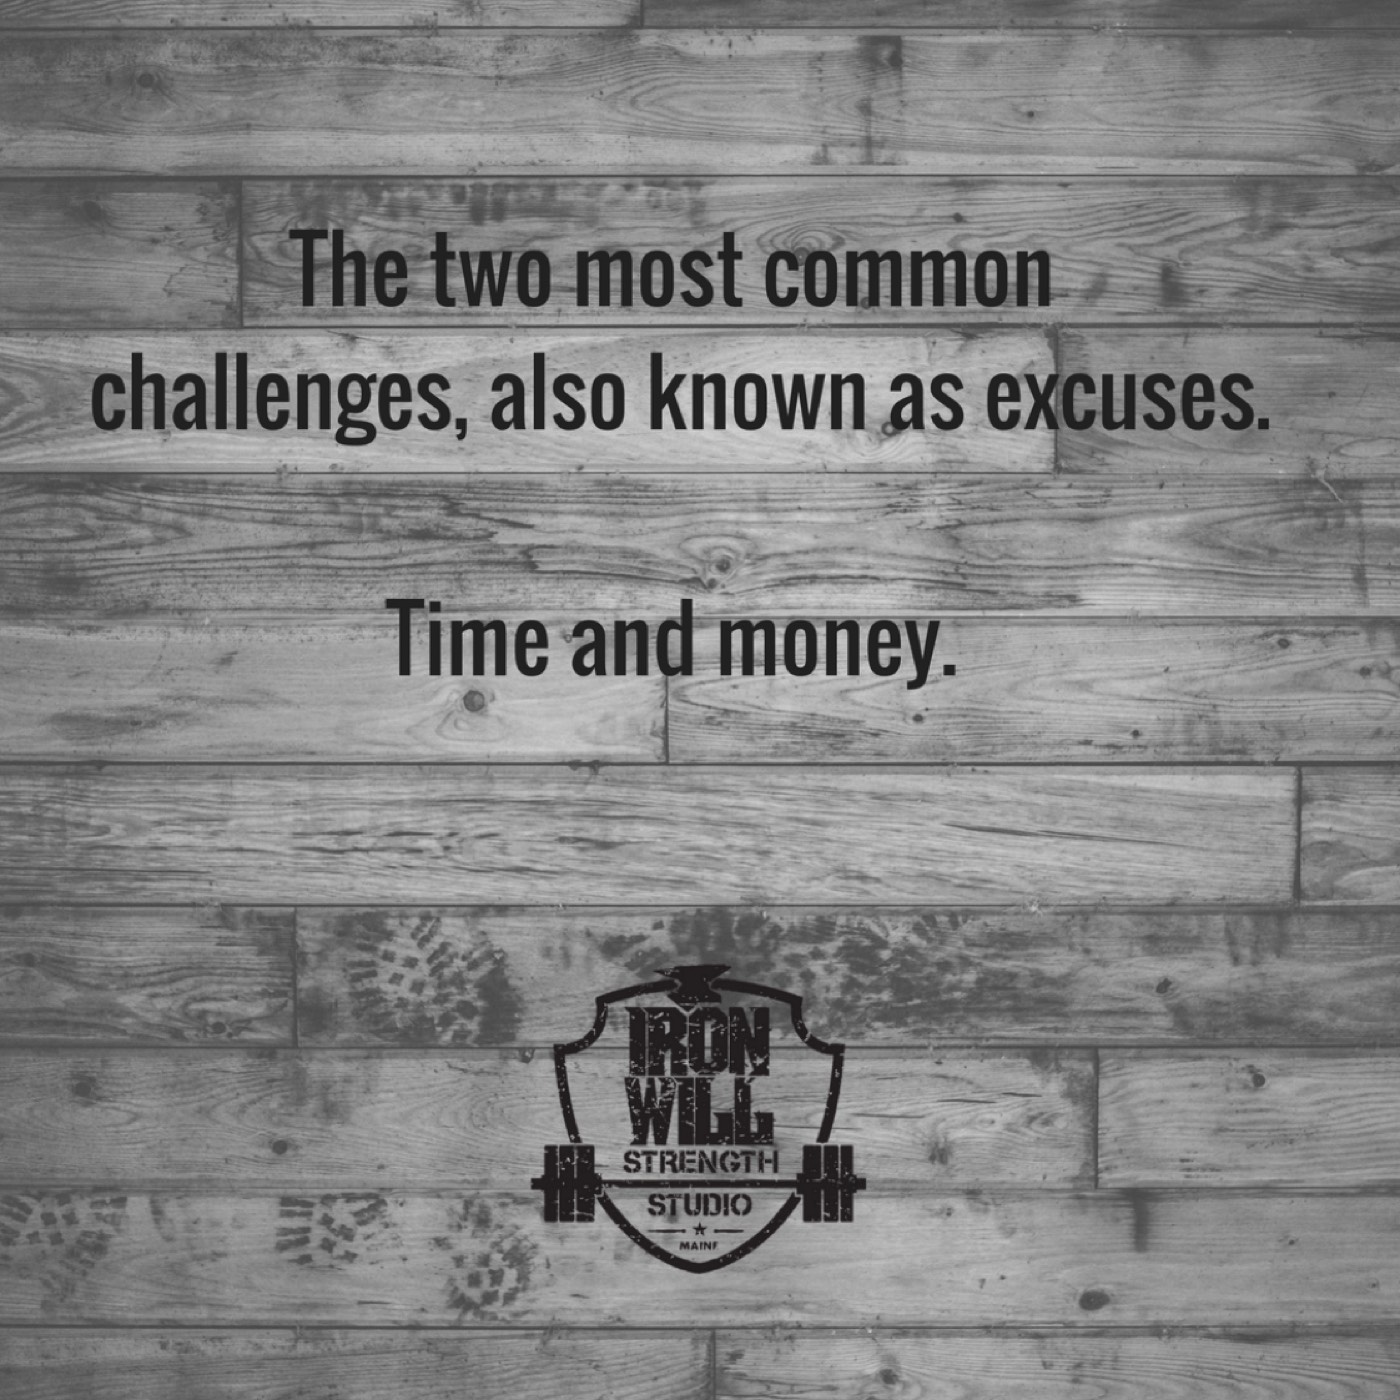 Episode 124- The two most common challenges- Time and money.